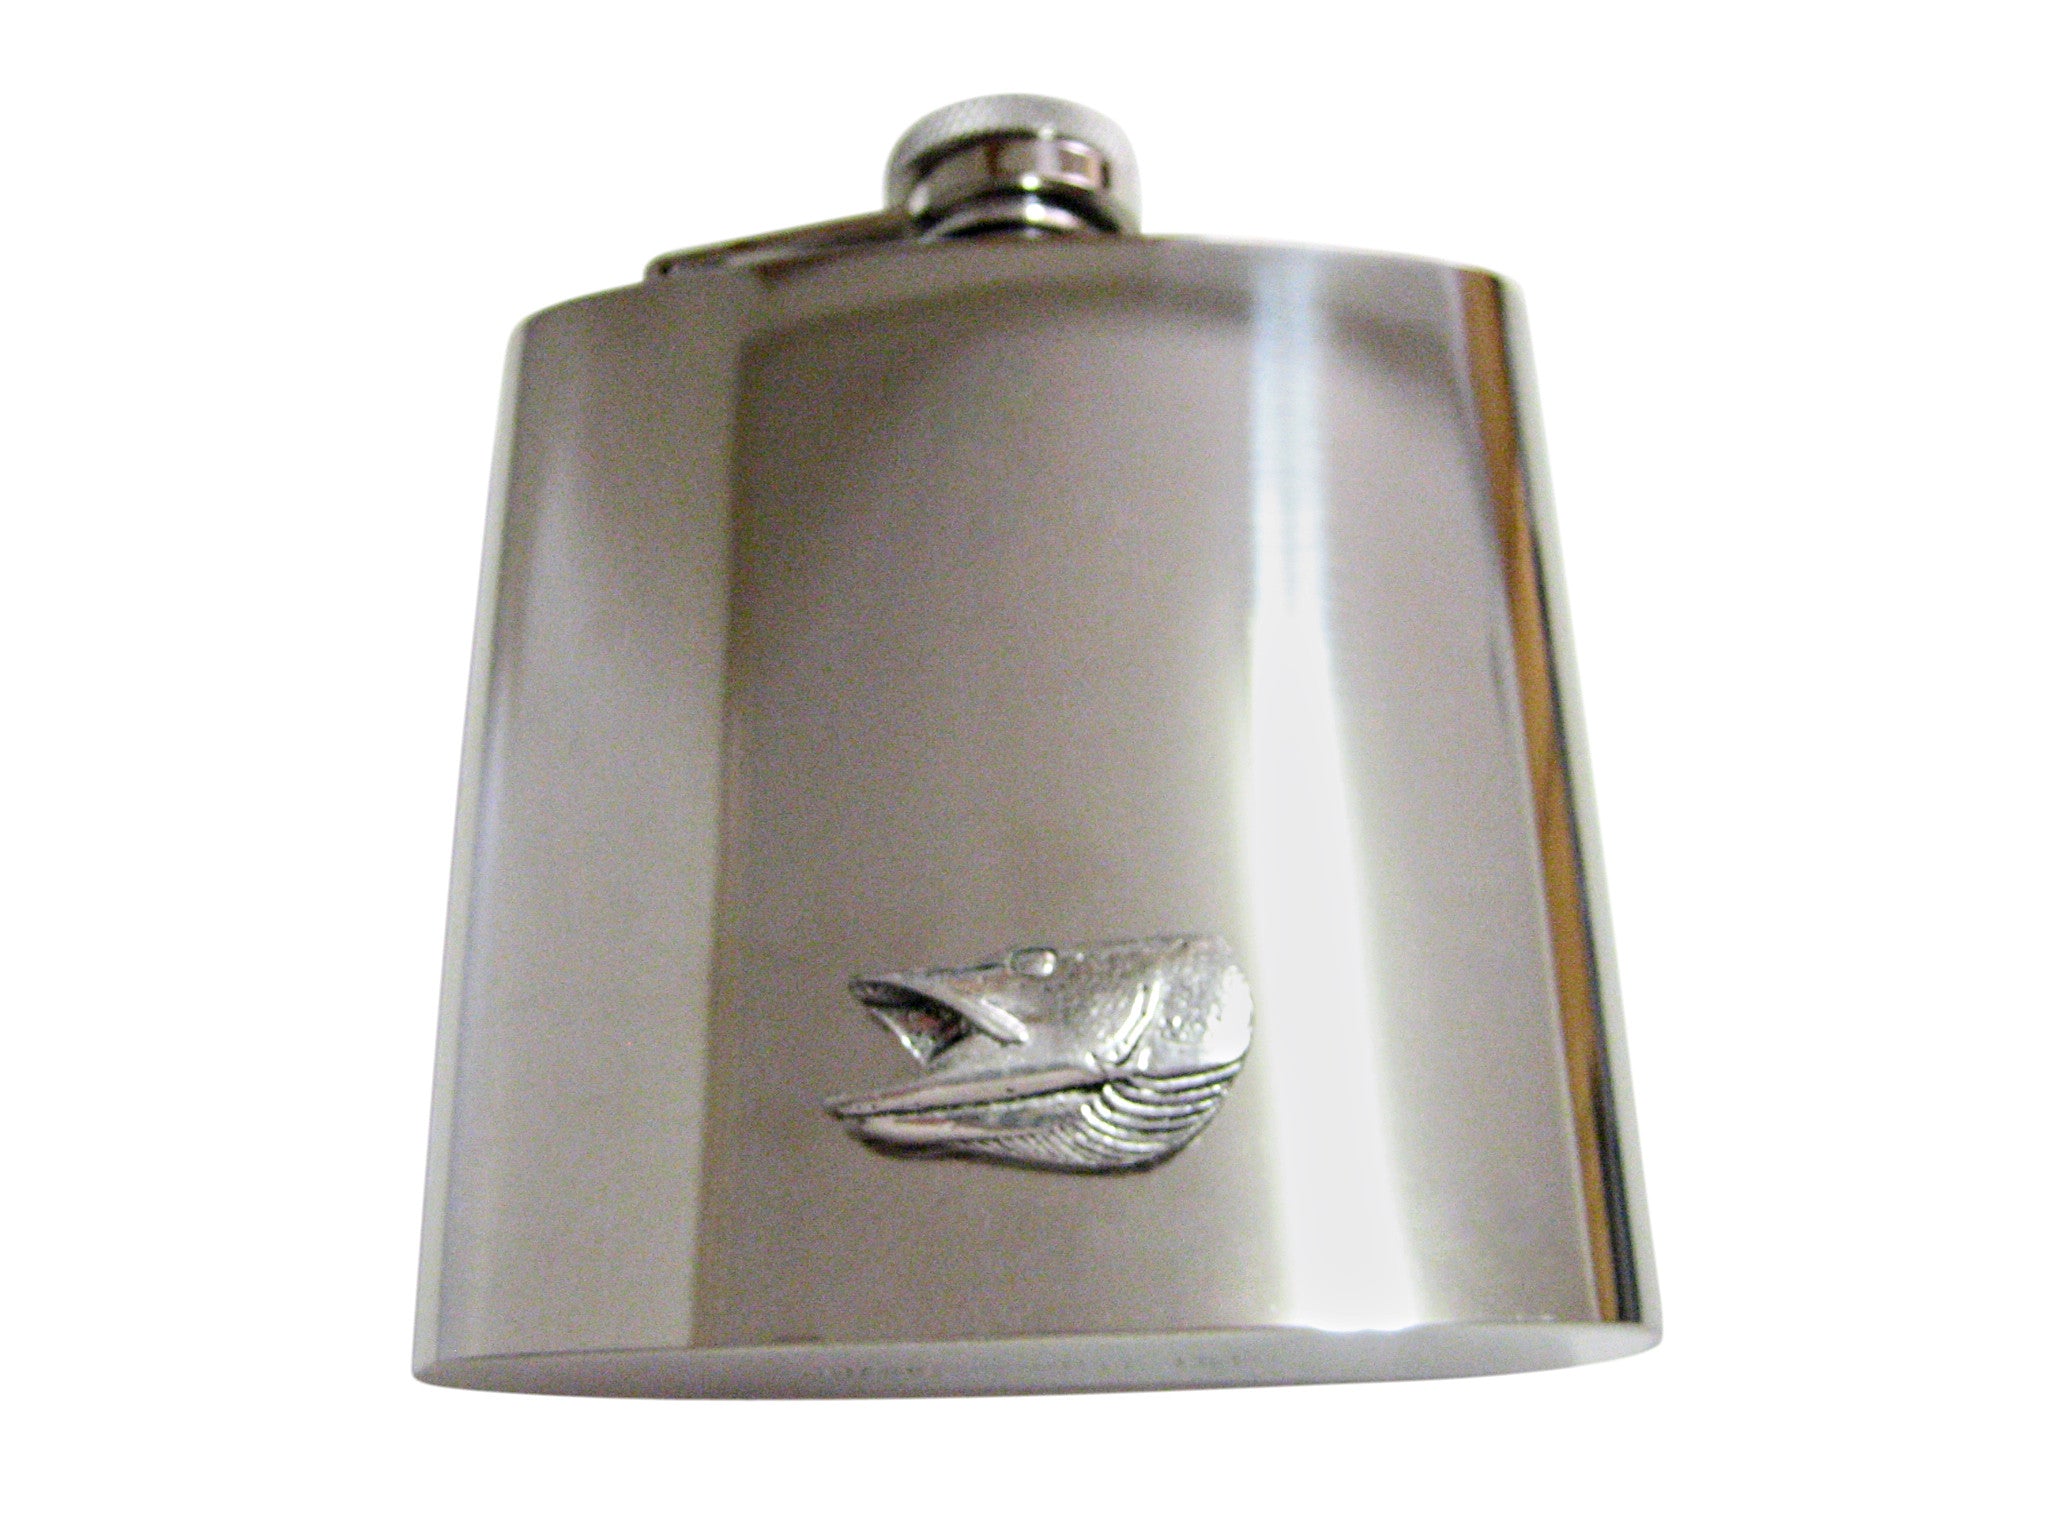 Pike Fish Head 6 Oz. Stainless Steel Flask